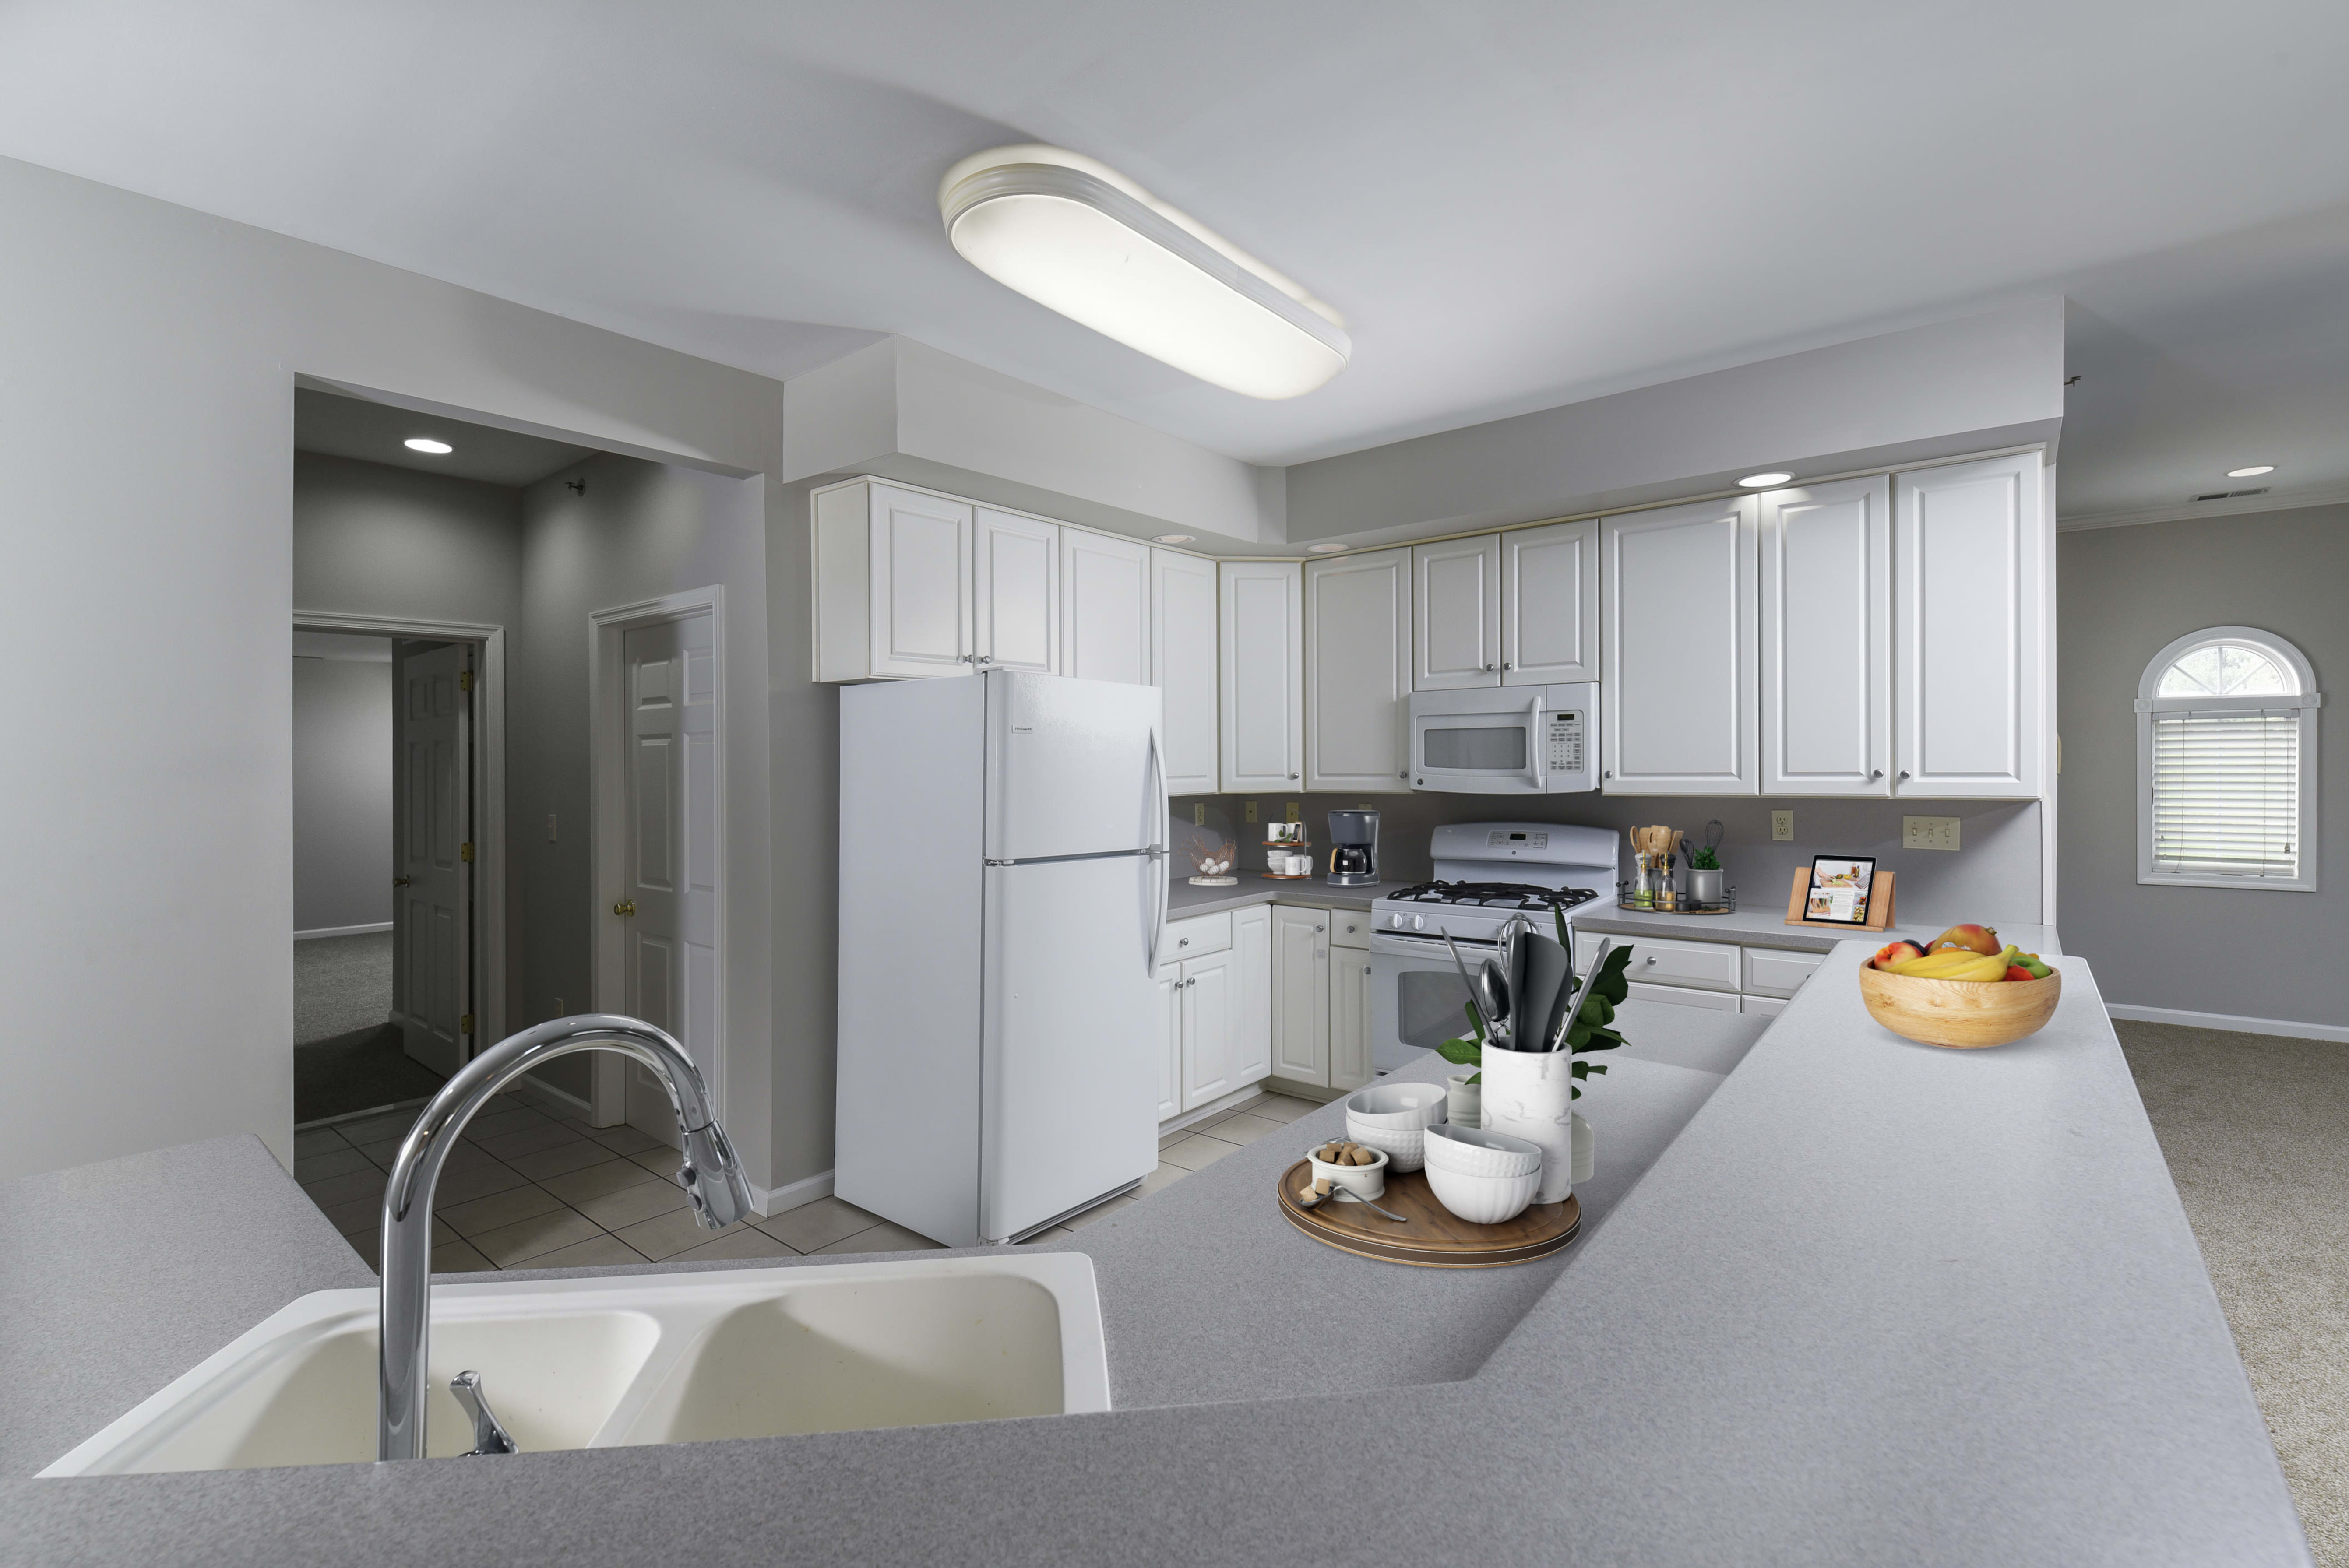 Kitchen at Springhouse Townhomes in Allentown, Pennsylvania